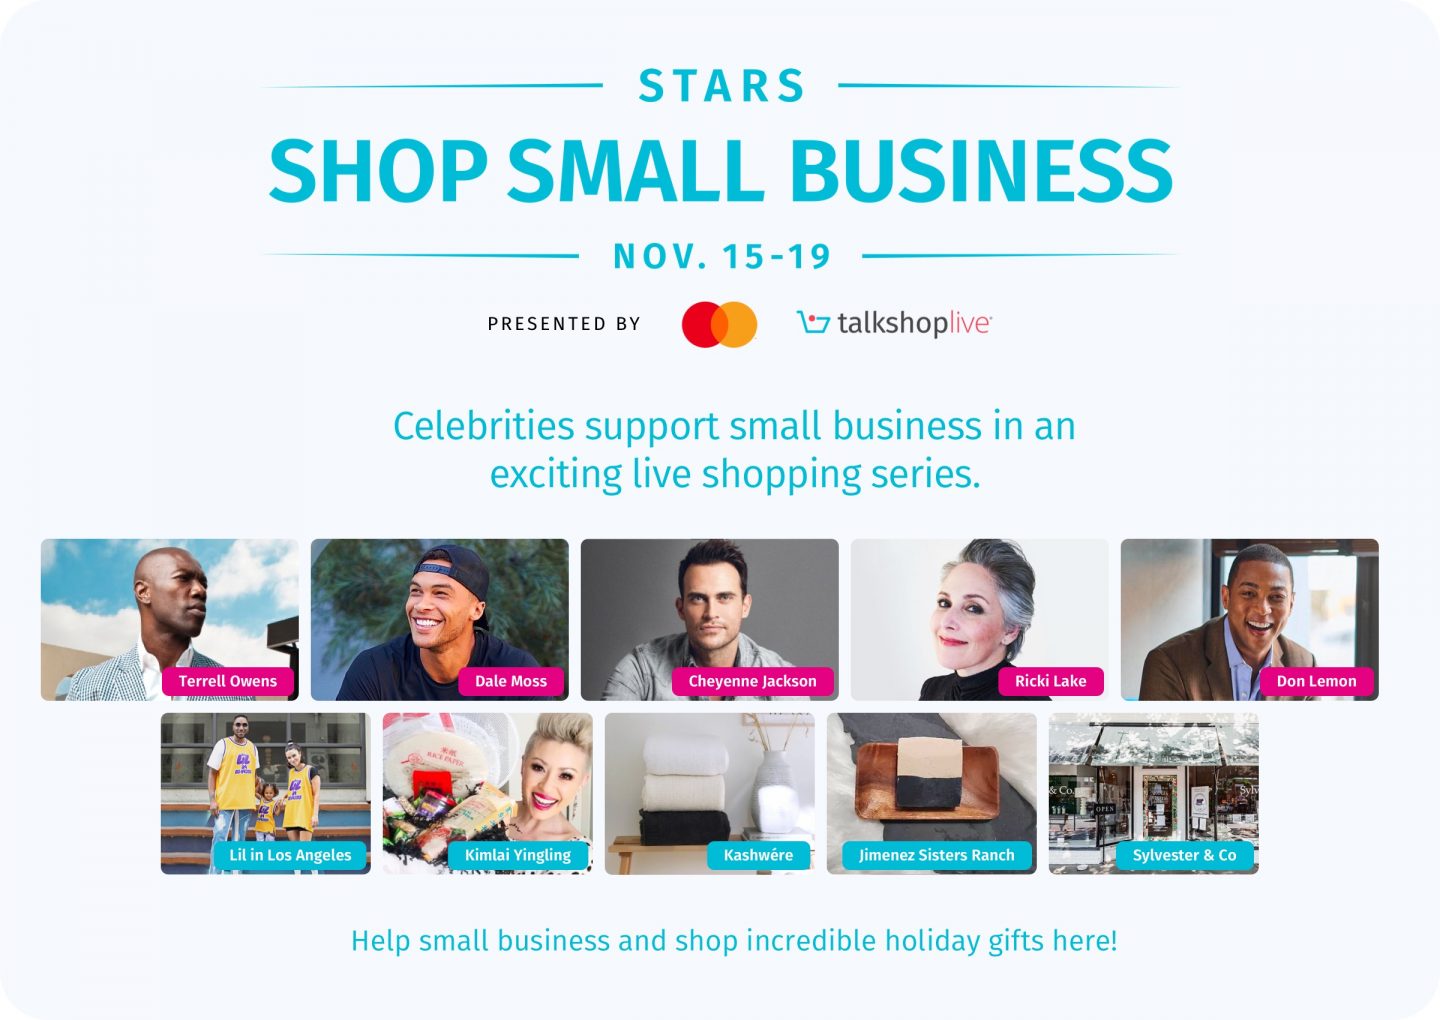 Talkshoplive® Set to Save Holiday Season for Shoppers and Small Businesses